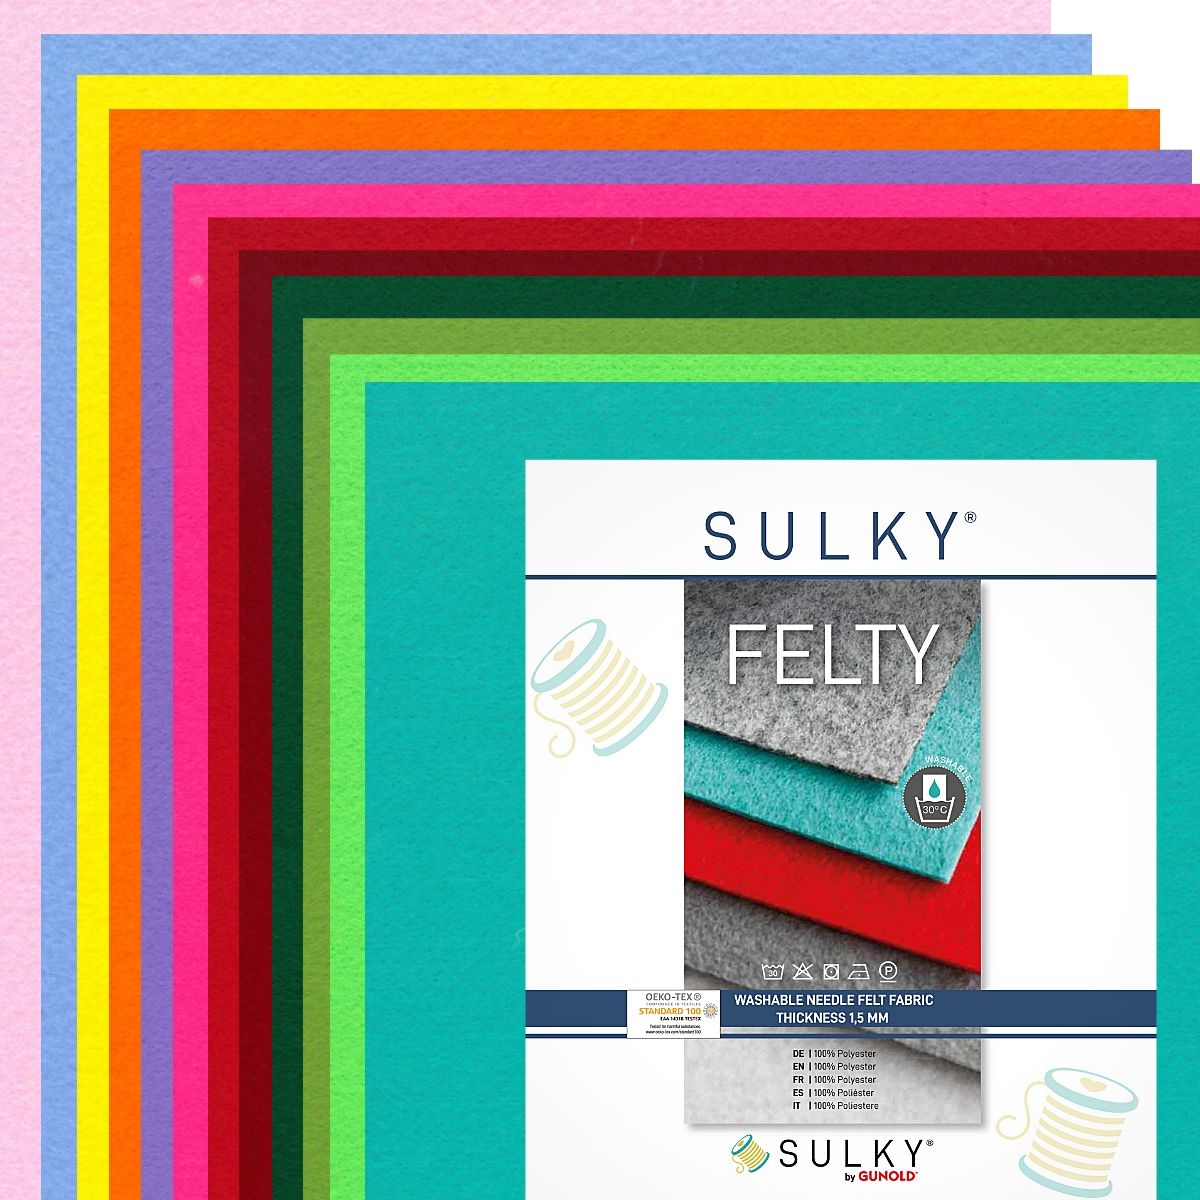 Is sulky felty suitable for hand embroidery?